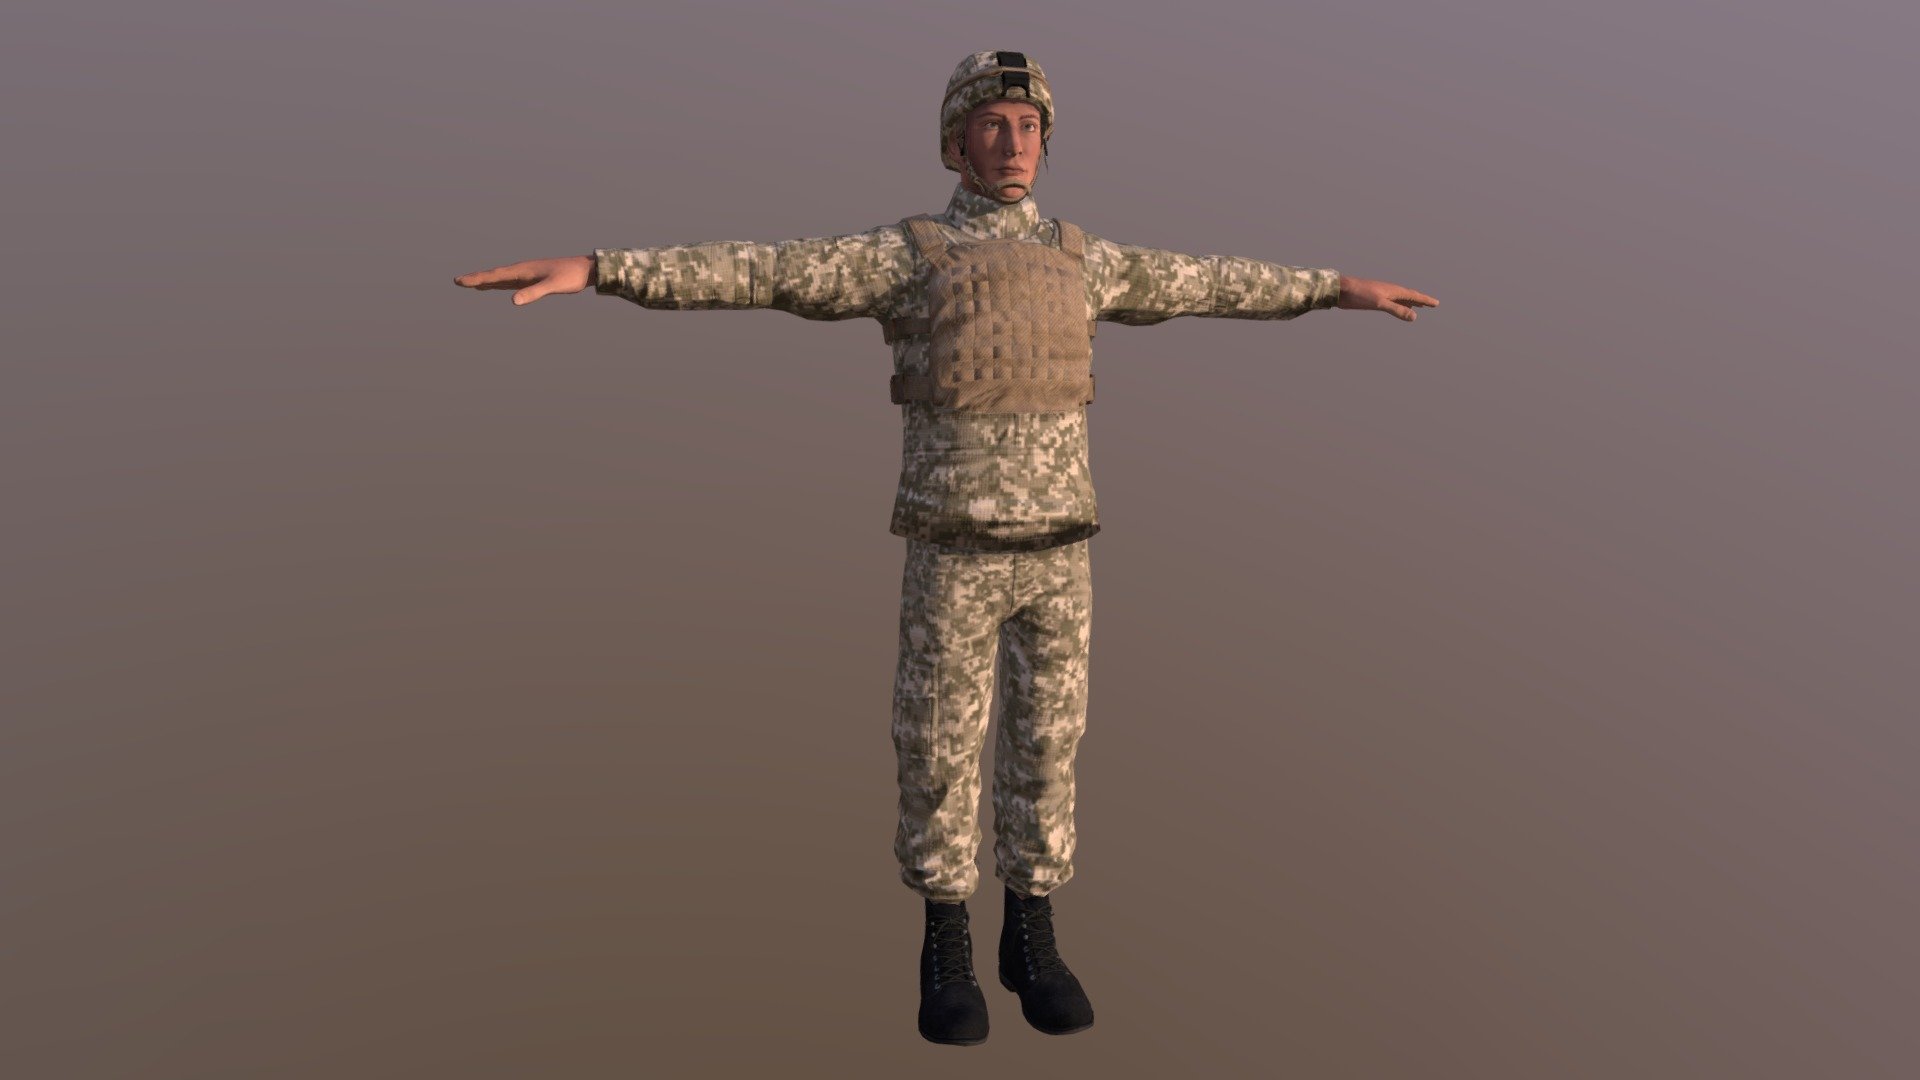 This is a Ukrainian Soldier equipped with the MM-14 camouflage. This model is free to download and can be used for whatever purpose 3d model